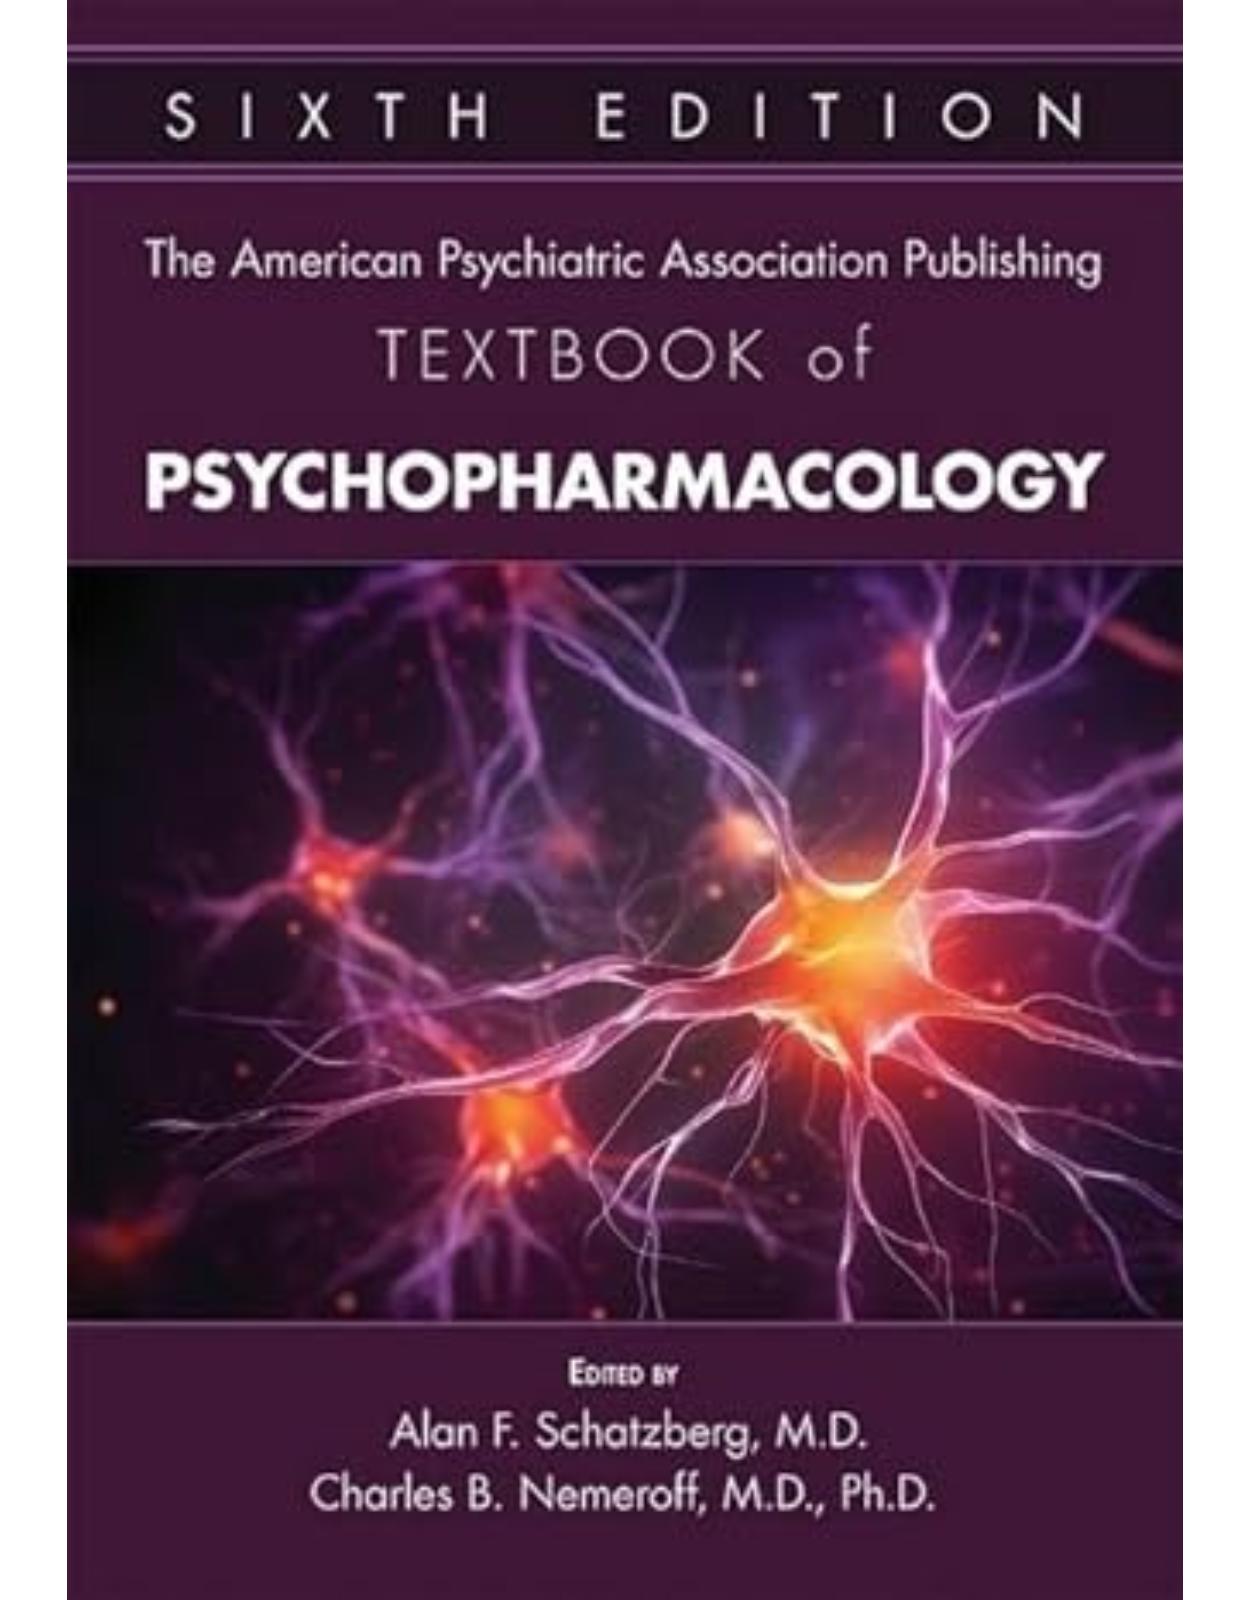 The American Psychiatric Association Publishing Textbook of Psychopharmacology, Sixth Edition